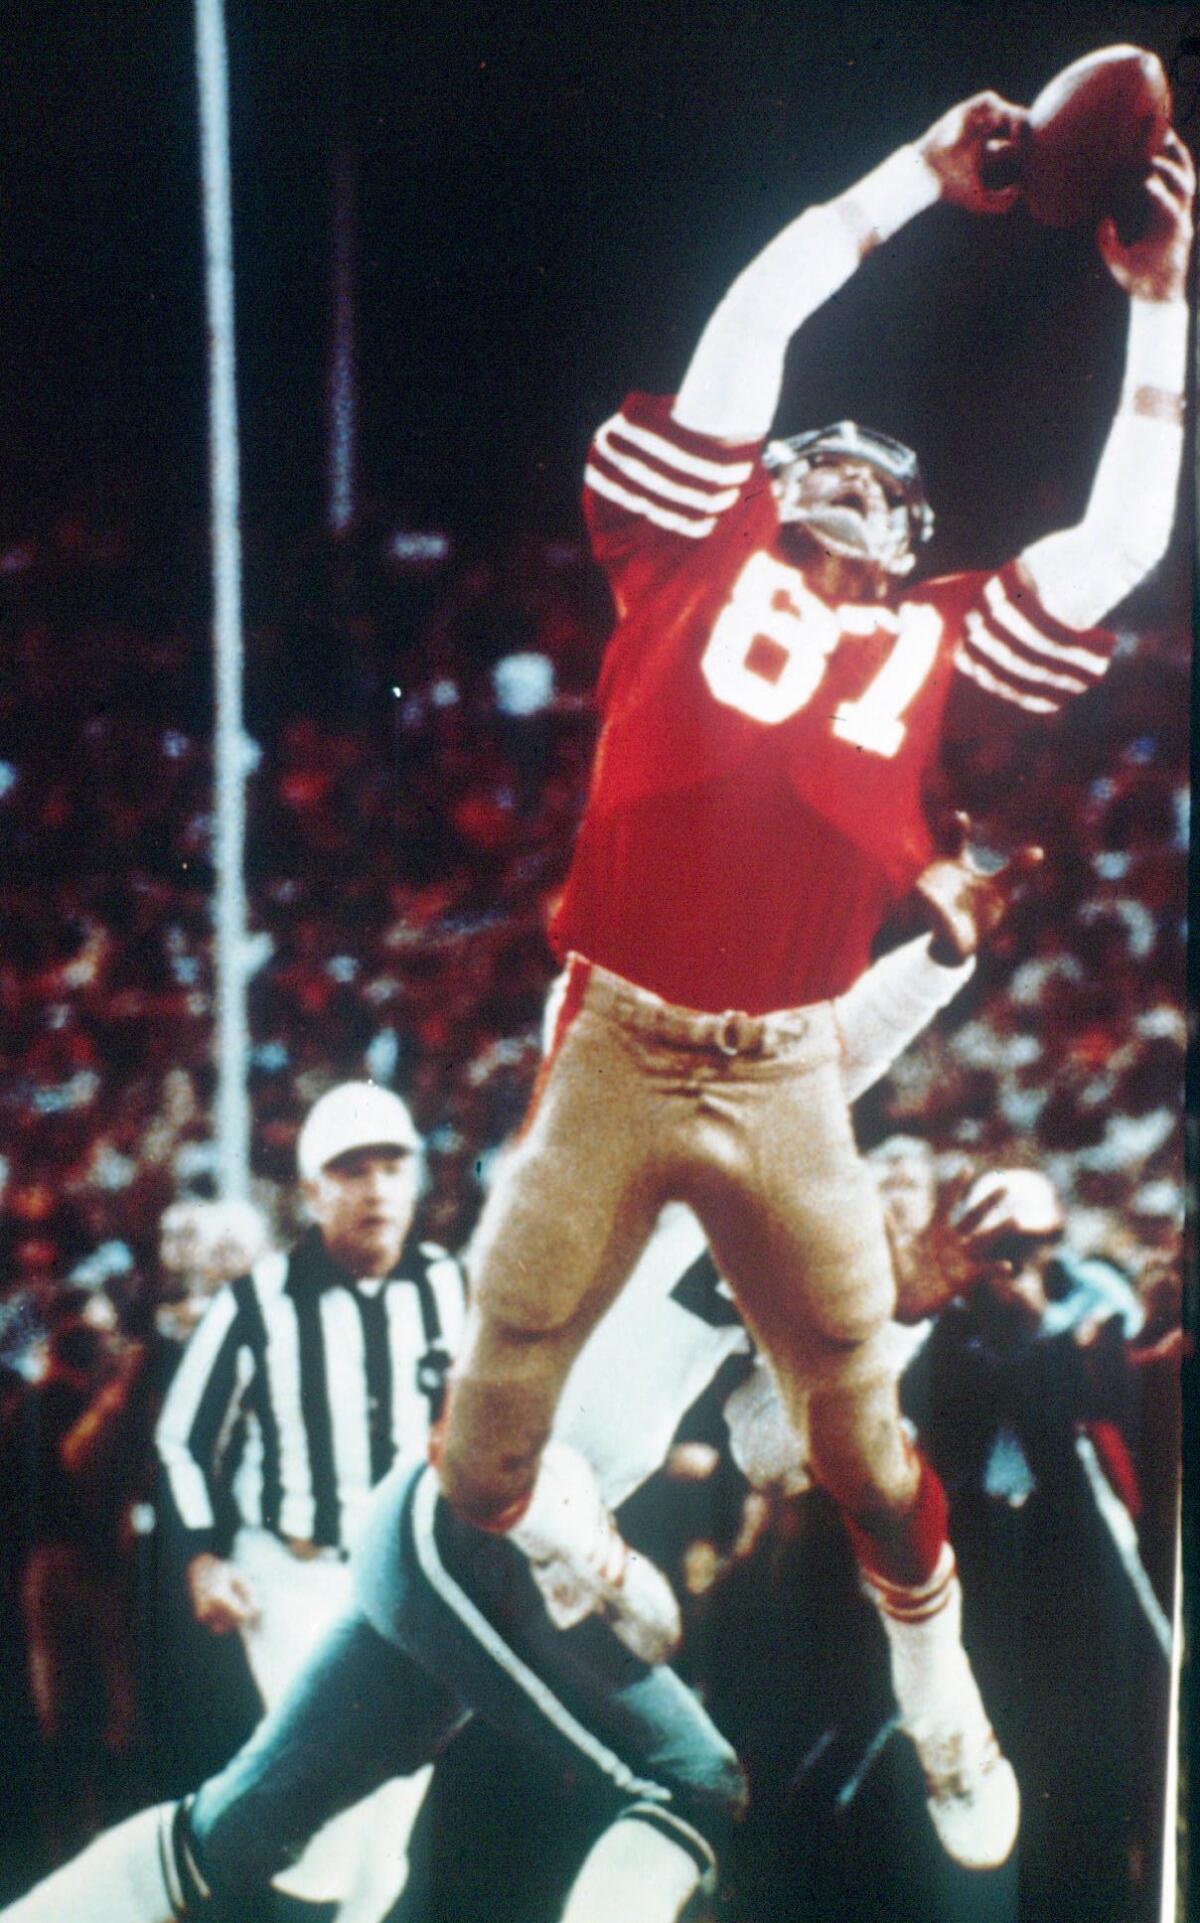 San Francisco 49ers wide receiver Dwight Clark leaps to grab a Joe Montana touchdown pass to beat the Dallas Cowboys on Jan. 10, 1982. "The Catch" sent the 49ers to their first Super Bowl.